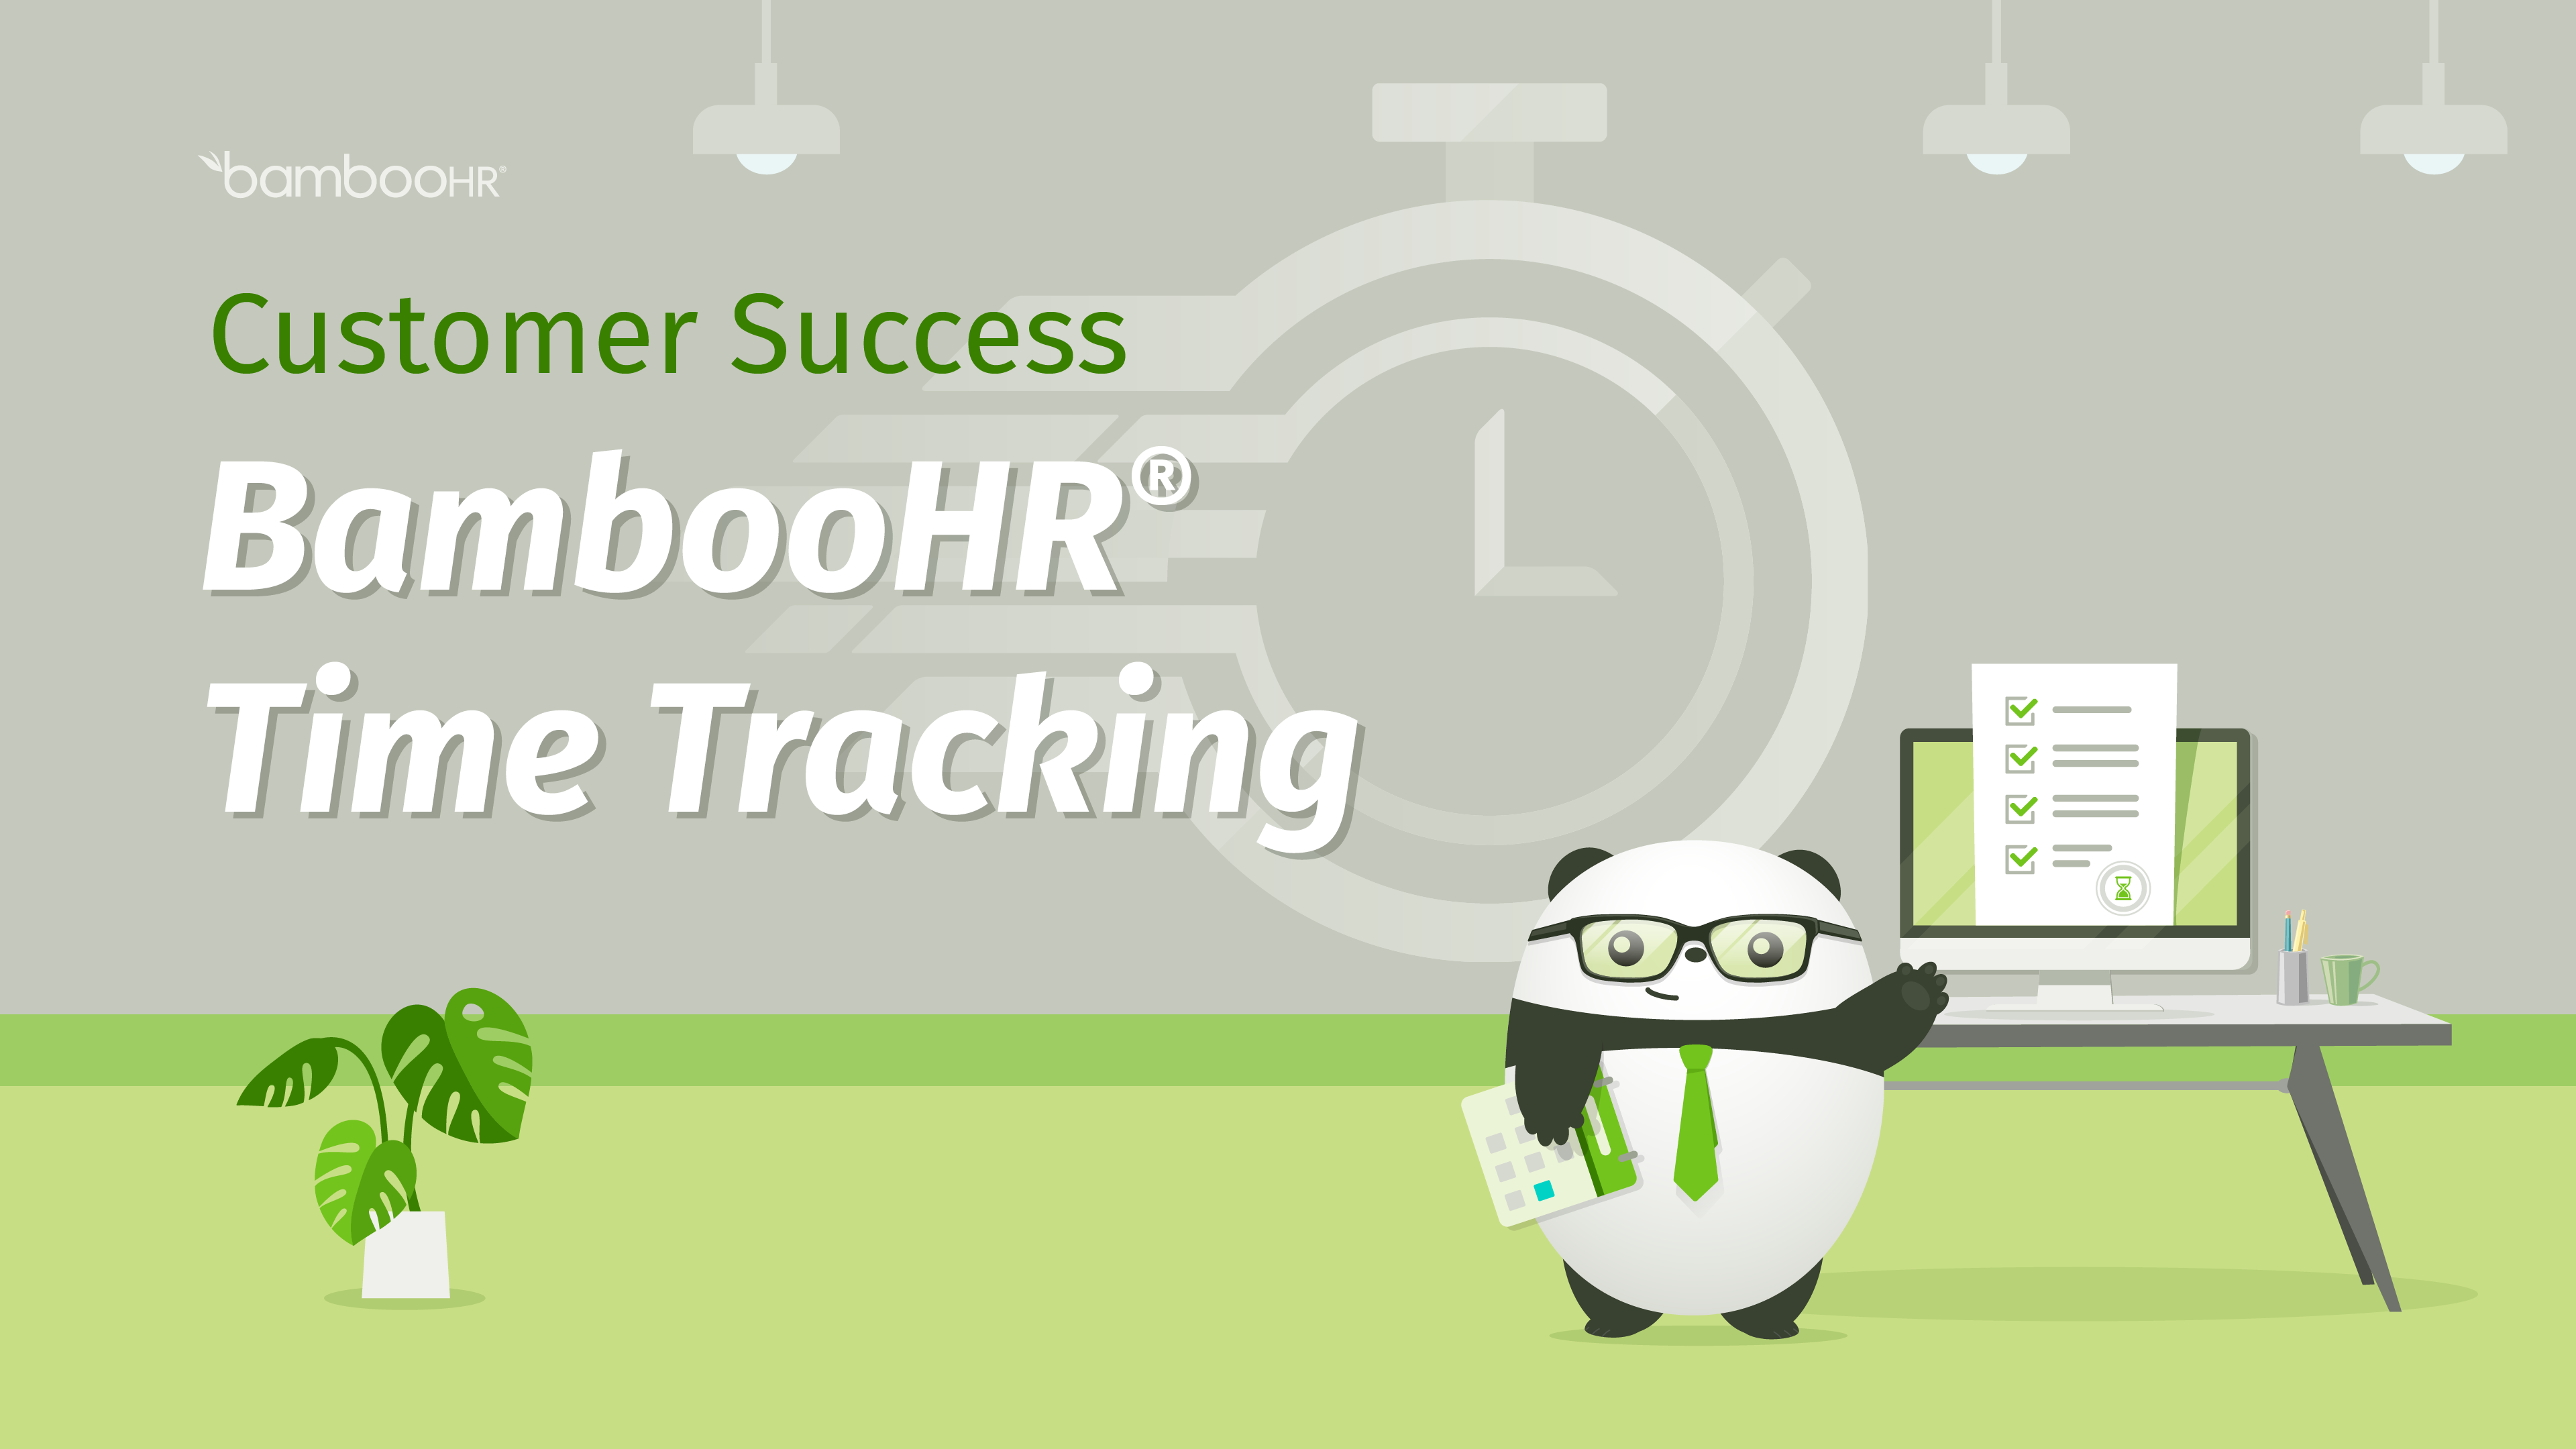 Customer Success: BambooHR® Time Tracking